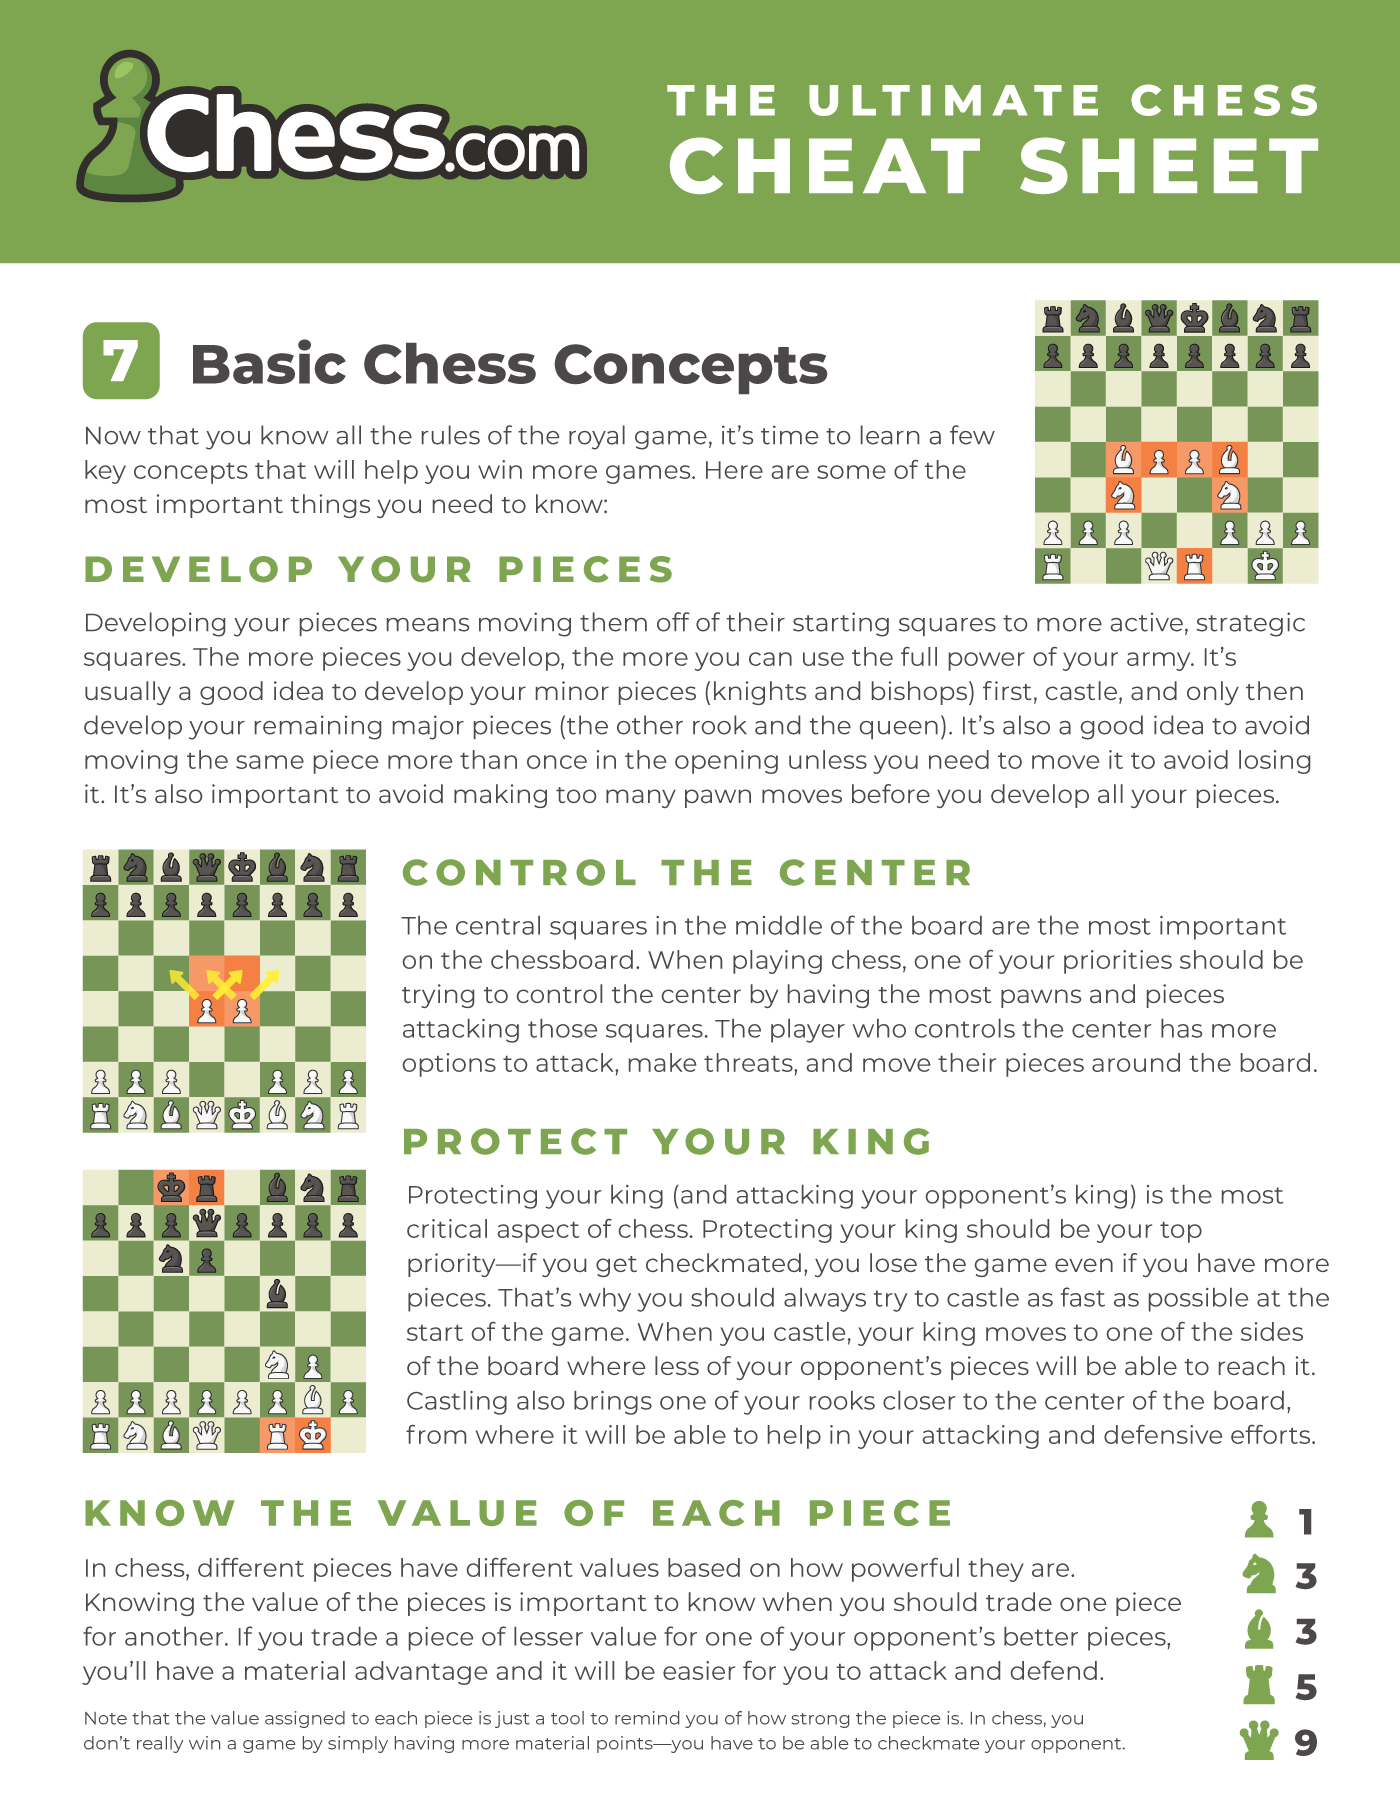 How to Play Chess: Chess Rules for Beginners